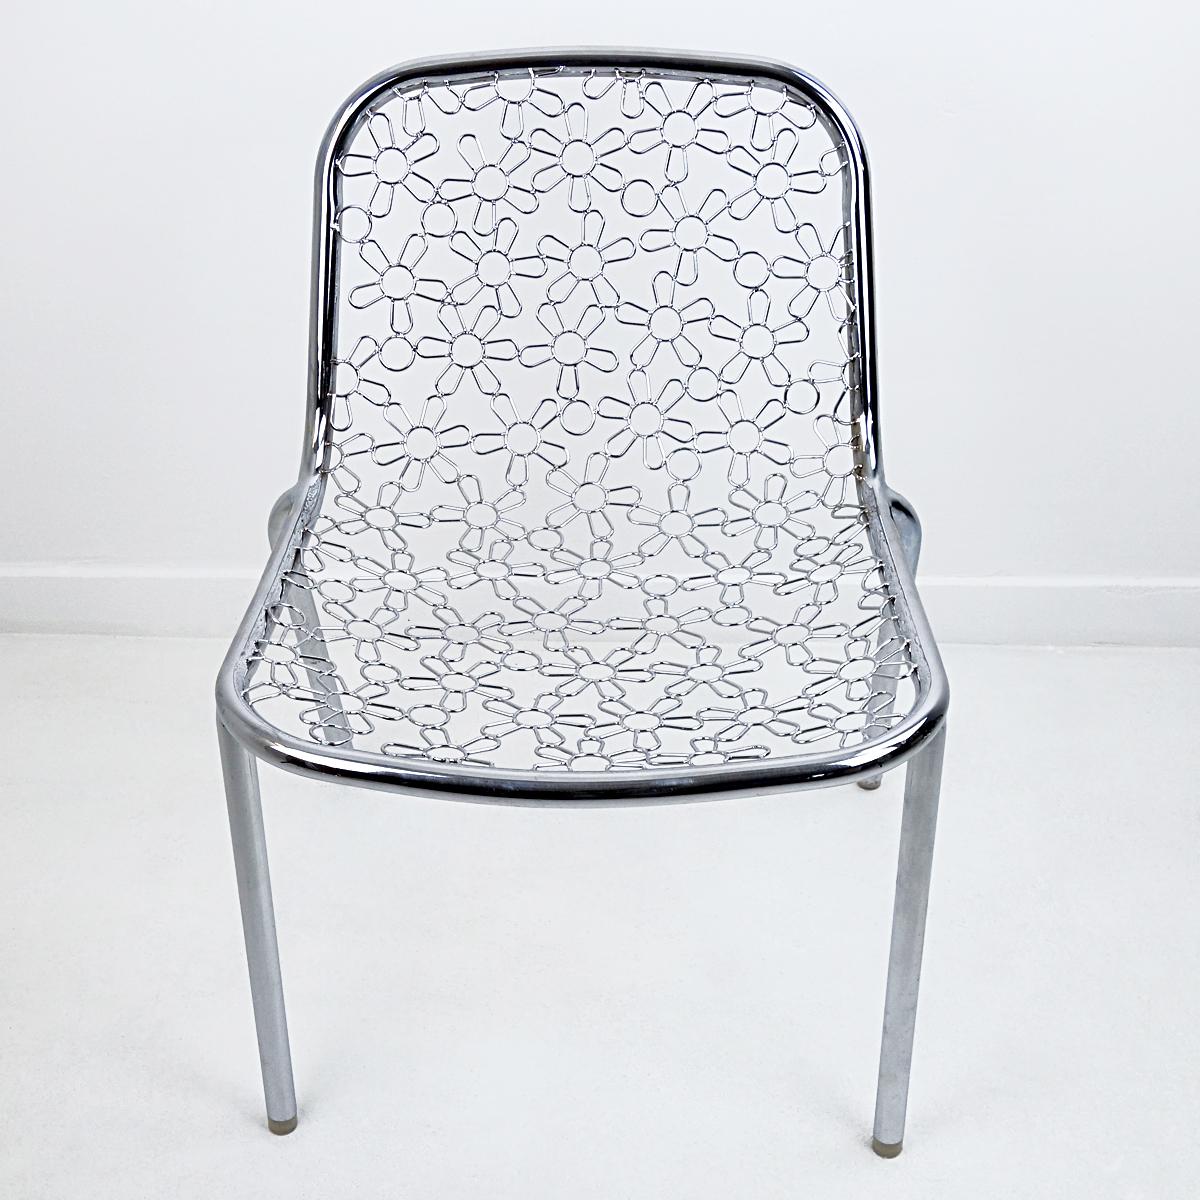 Unique piece by world famous Dutch designer Marcel Wanders. It was sold during a sample sale at MOOOI in Amsterdam in 2005. The chrome has a flower pattern.
This chair never actually went into production. Wanders finally chose a black powered